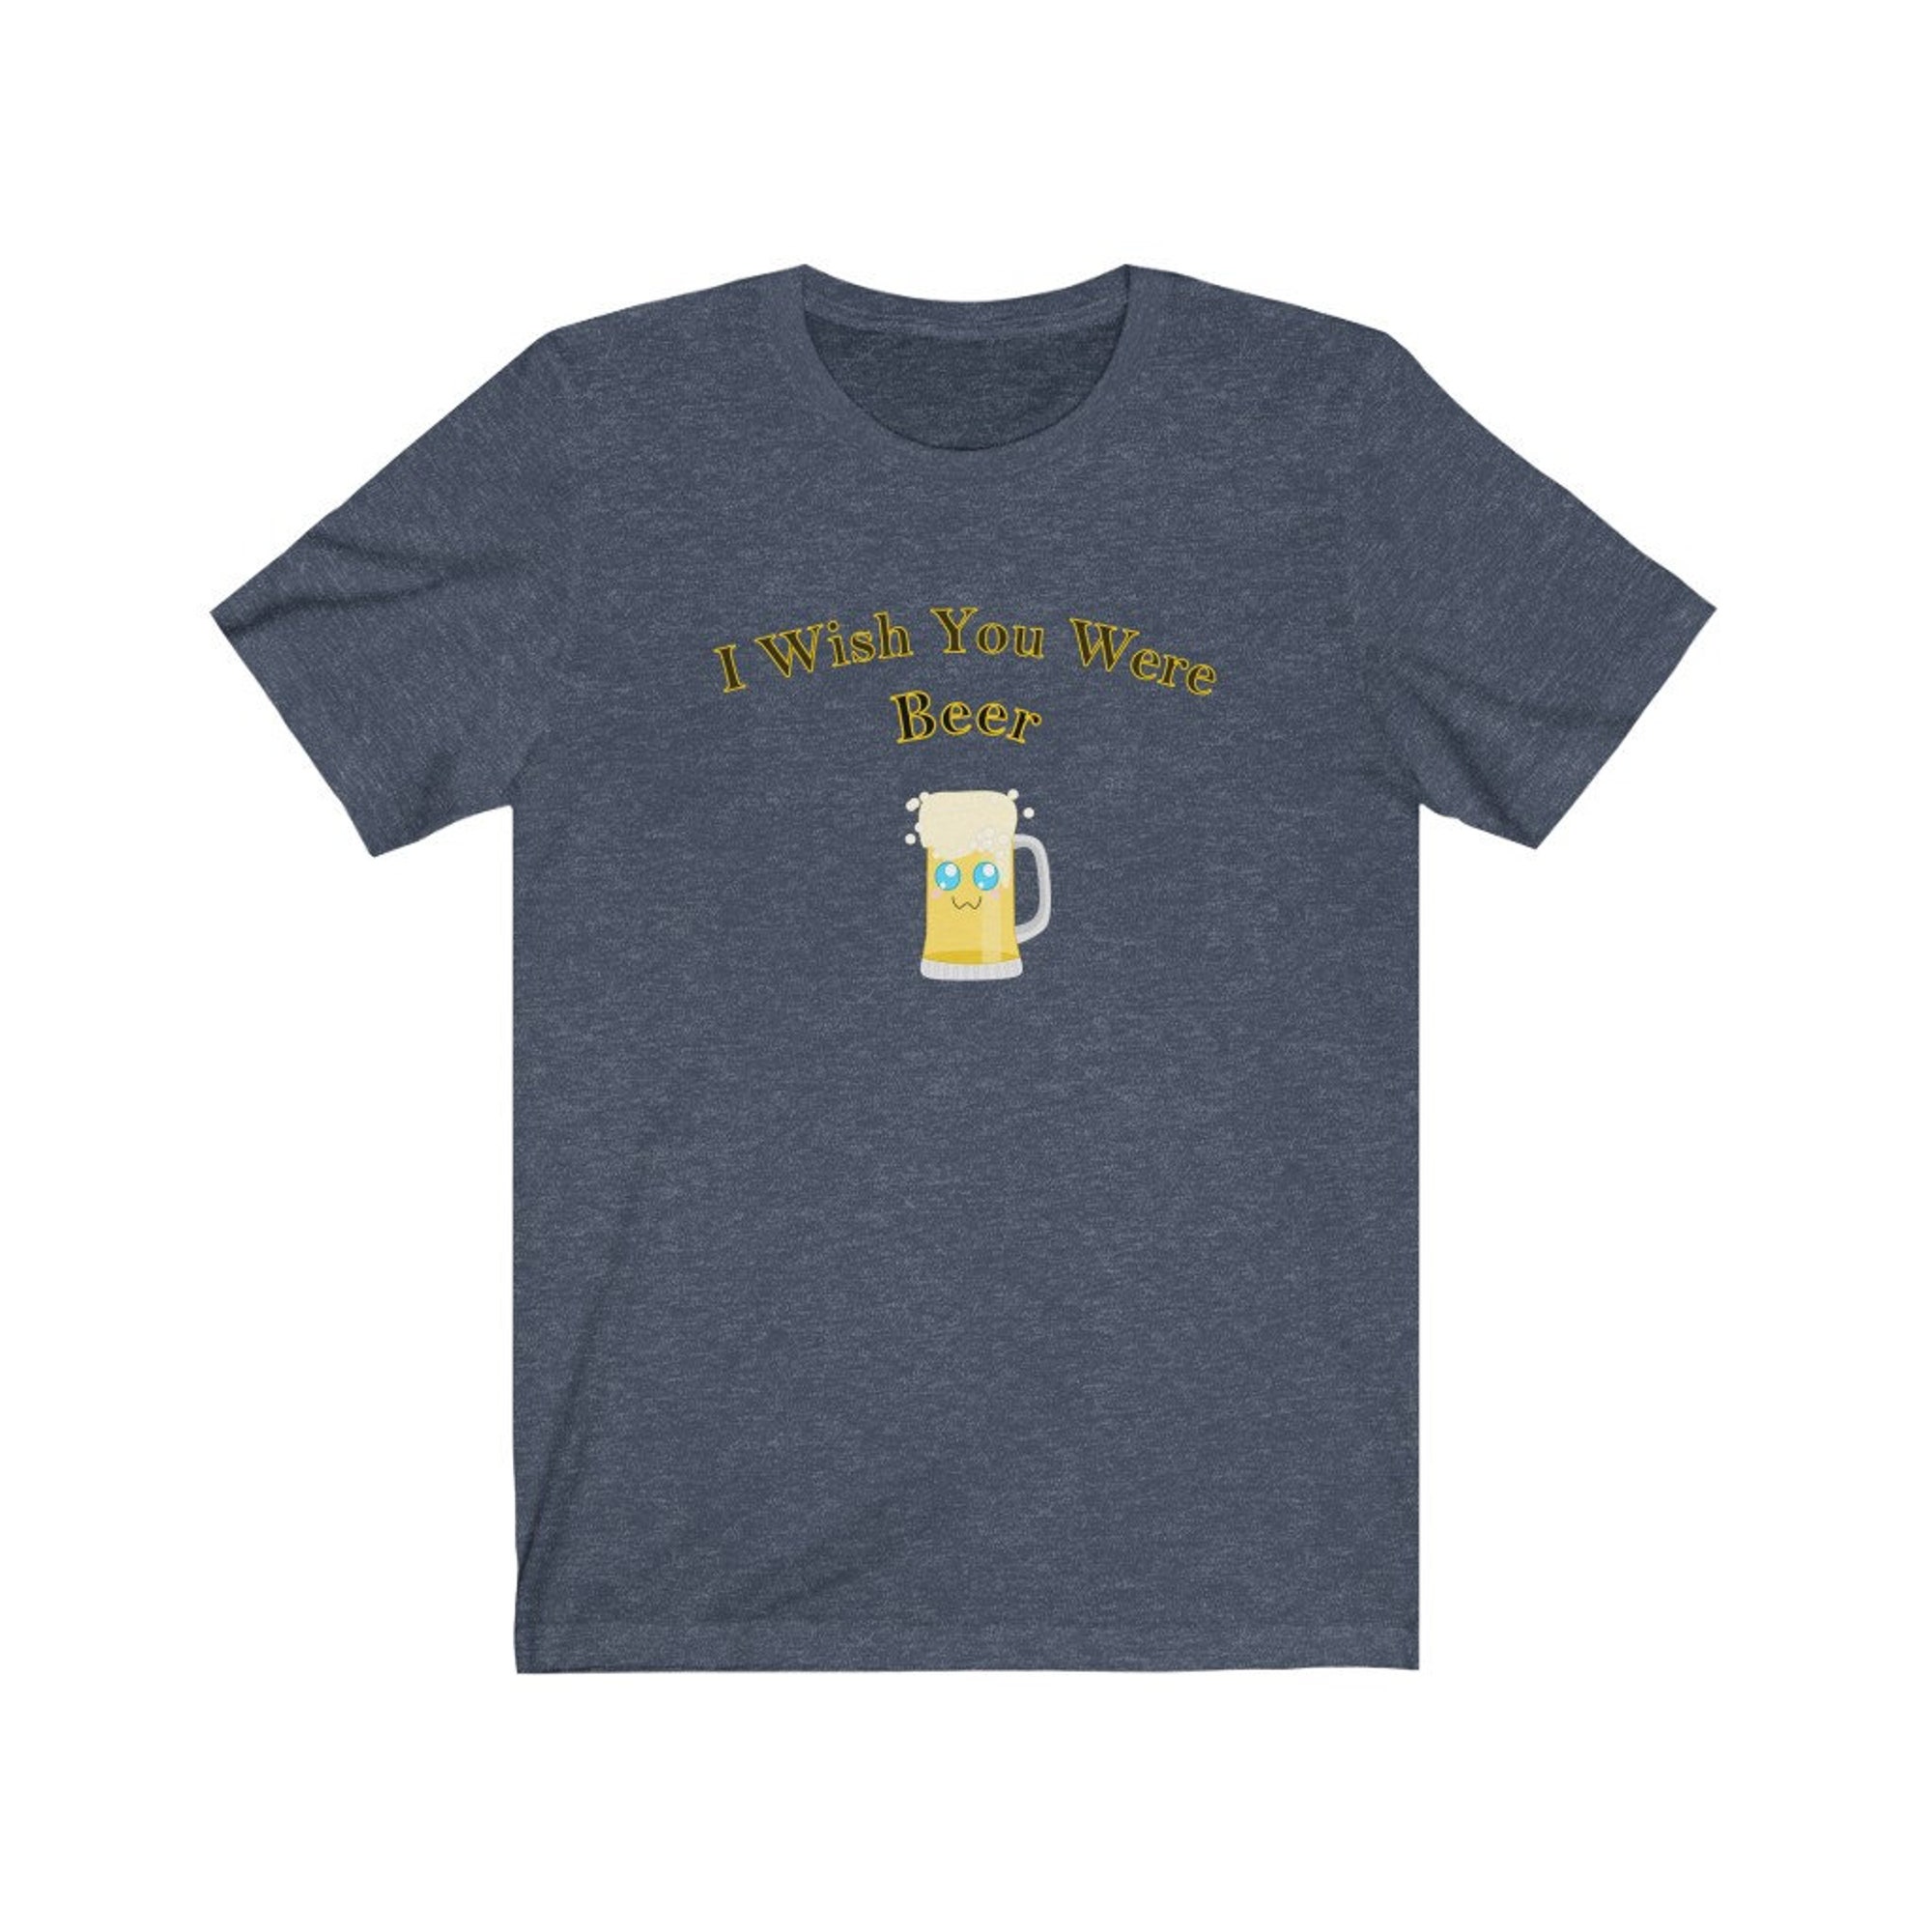 Funny T-shirt | I wish you were Beer Art